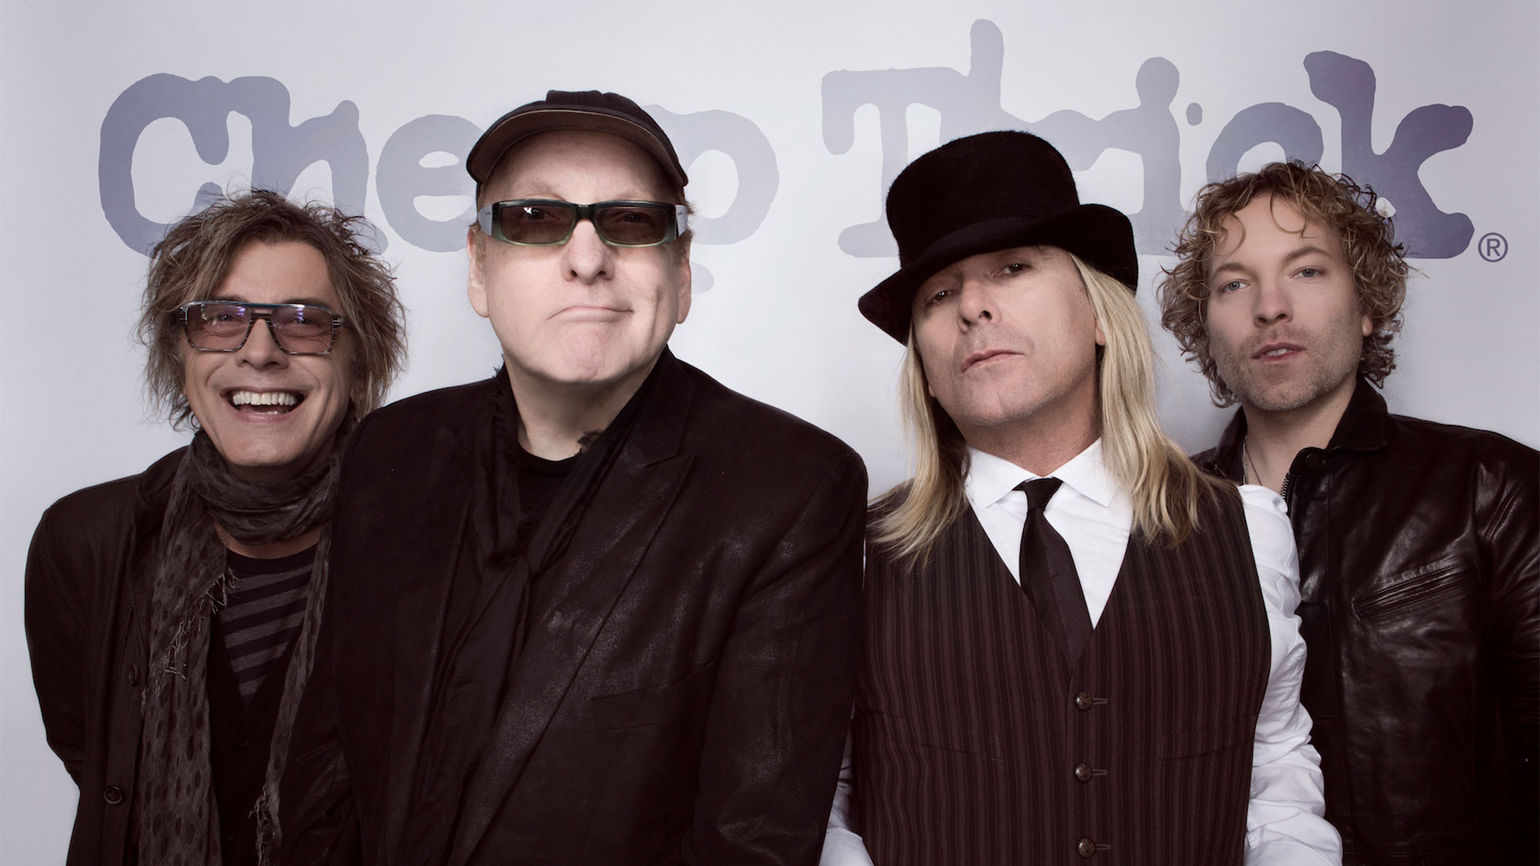 Cheap Trick live at the Strat this winter